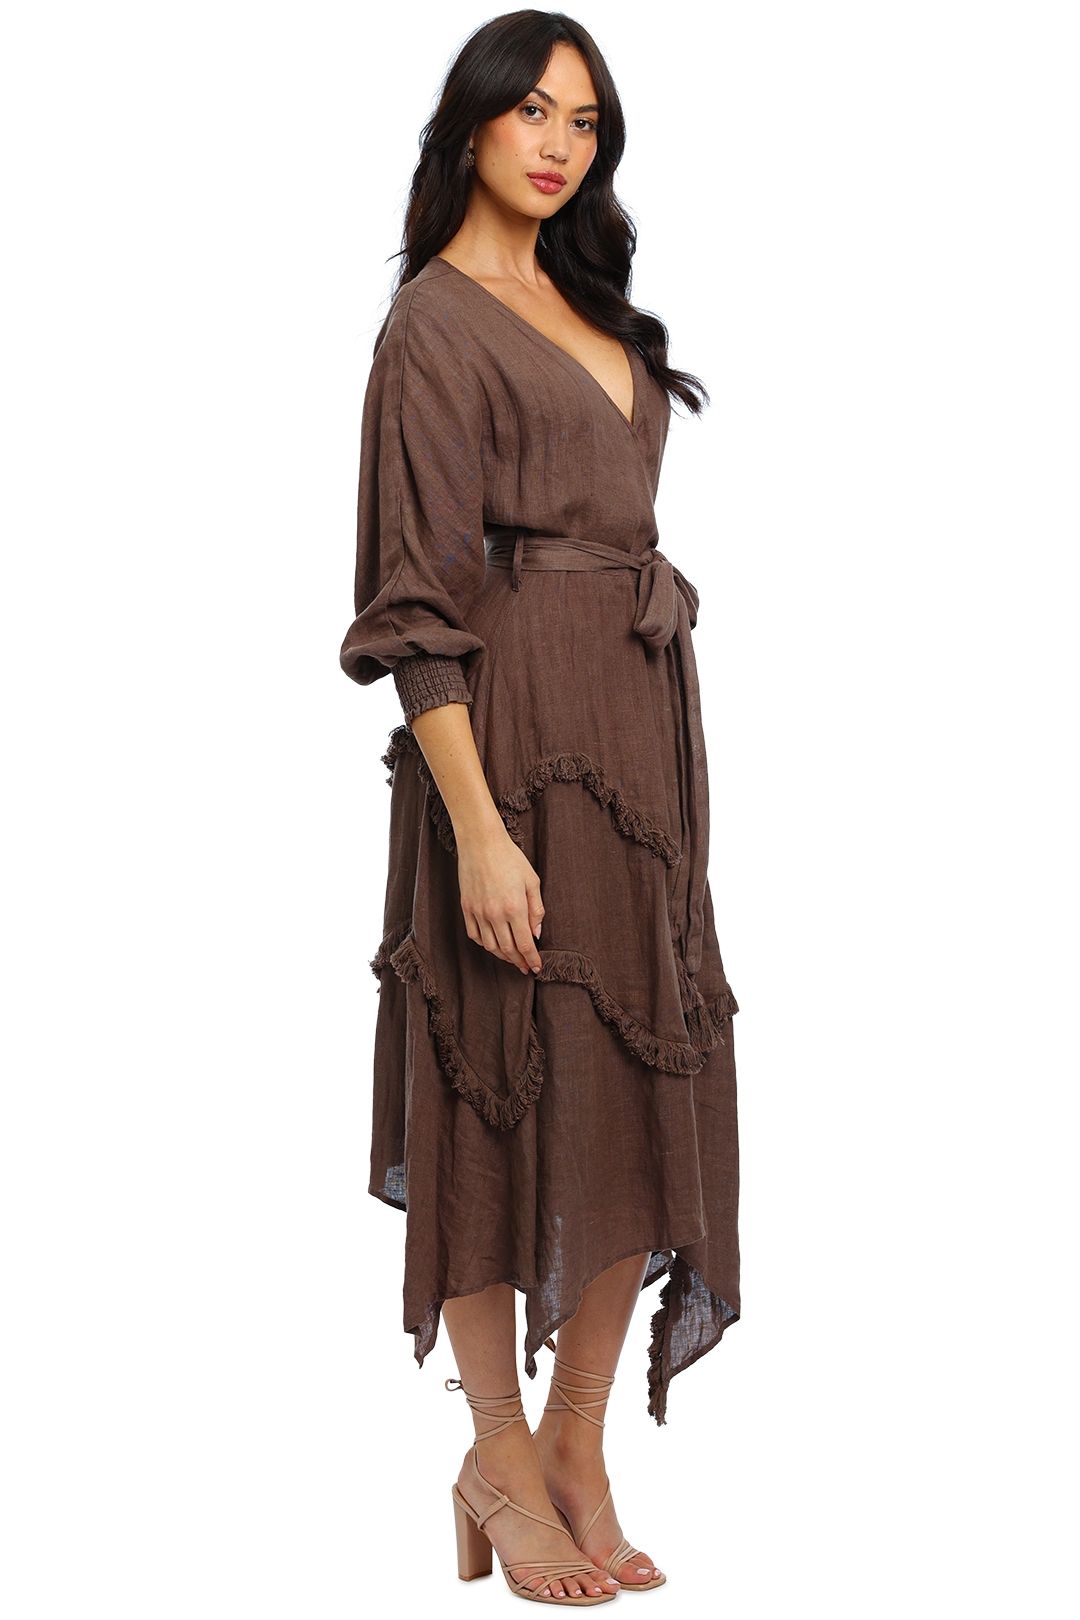 Ministry of Style Wilderness Maxi Dress brown